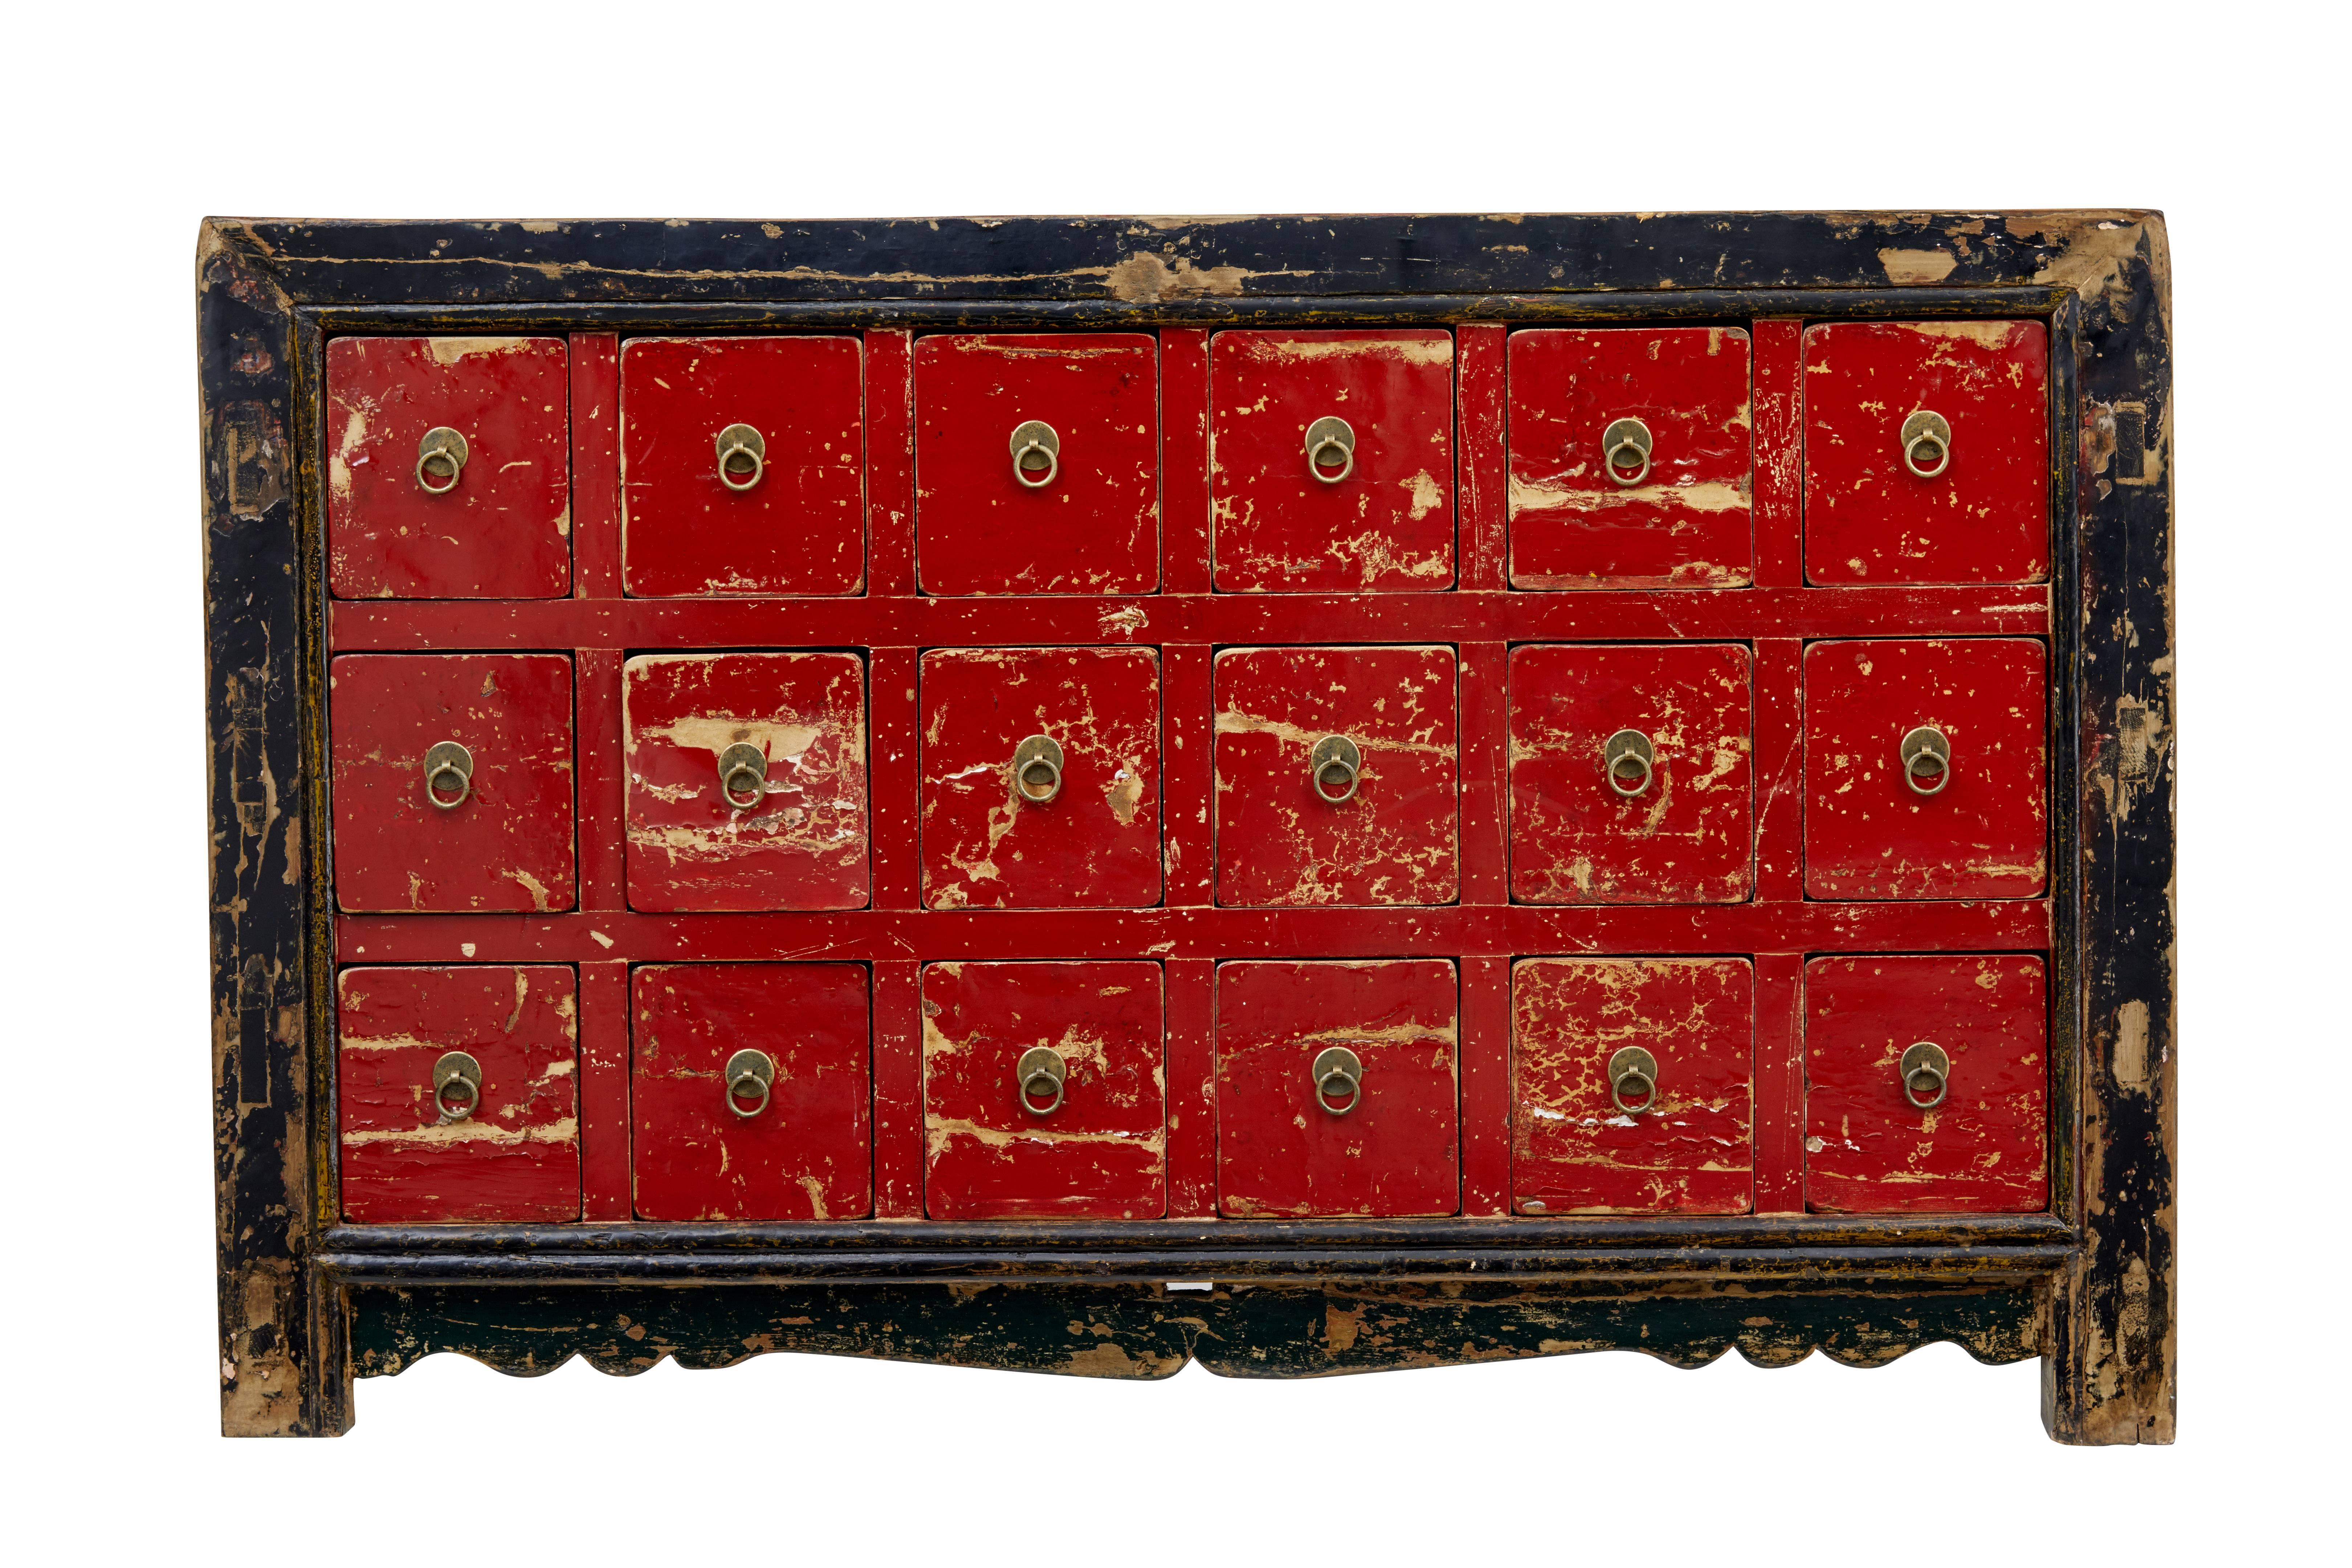 Decorative piece of Chinese export furniture, circa 1900.
Wide enough to serve as a sideboard, three banks of six drawers.
Red lacquer front, side and top with contrasting black frame.
Losses to lacquer and underneath paint.

Measure: Height 34